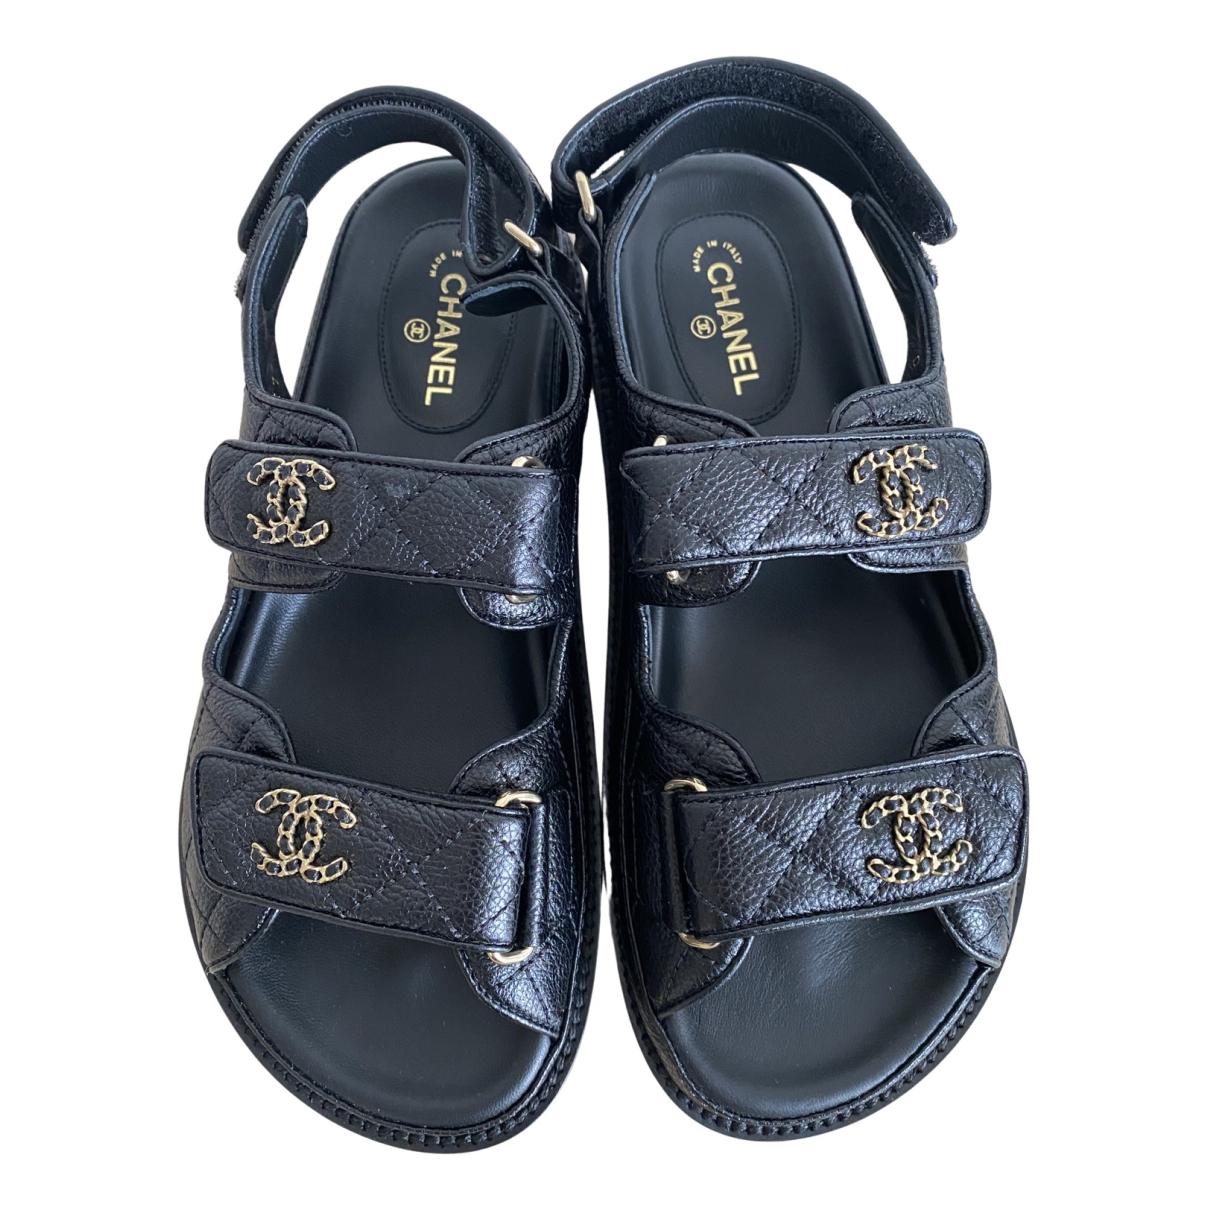 Leather sandals Chanel Black size 37 EU in Leather - 25272949